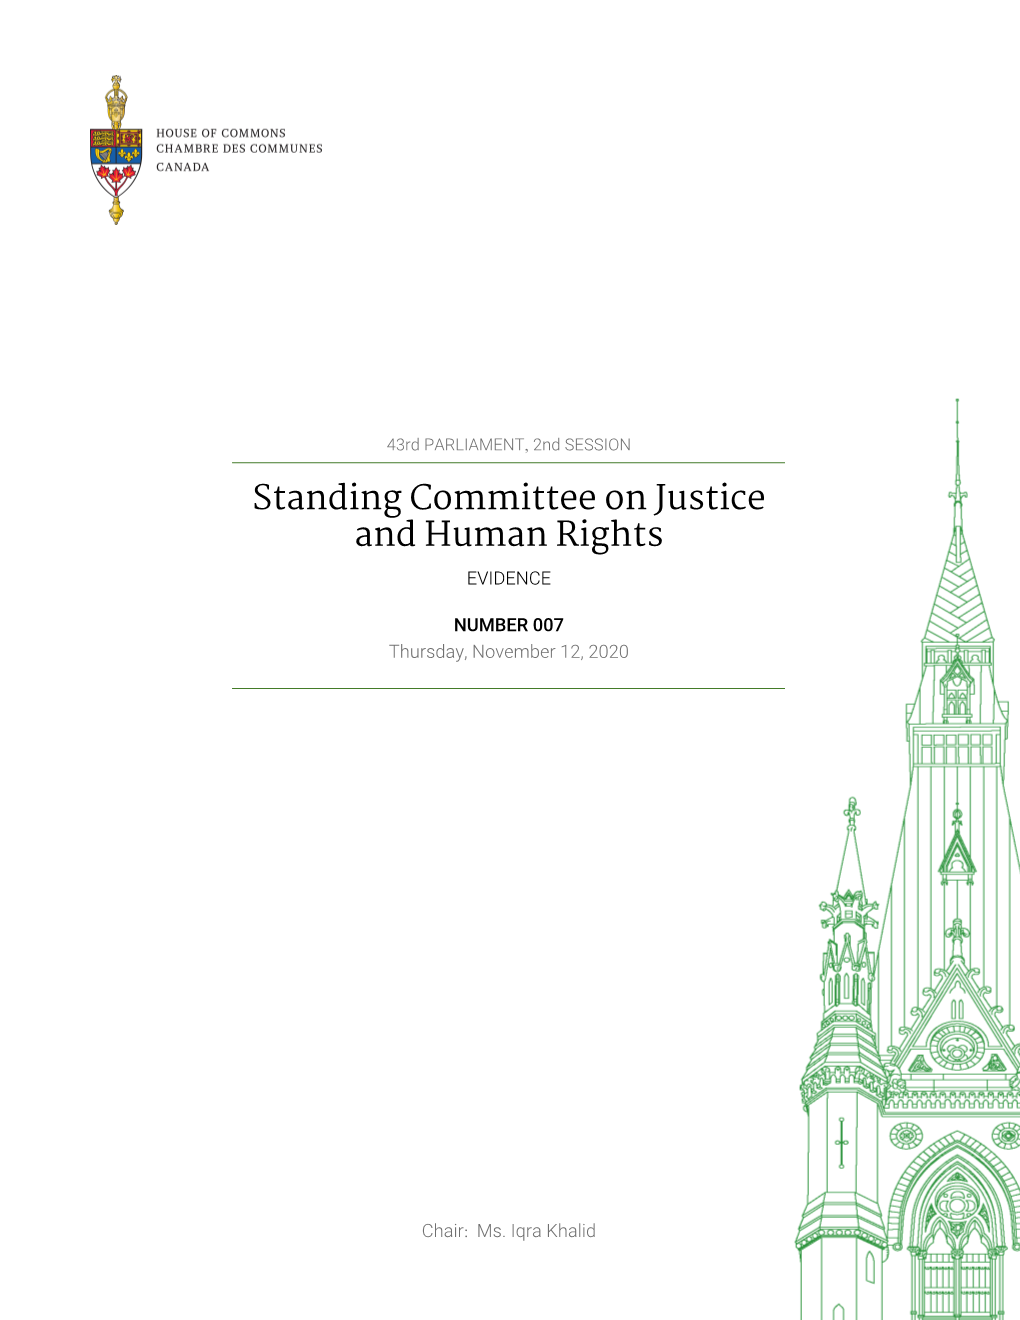 Evidence of the Standing Committee on Justice